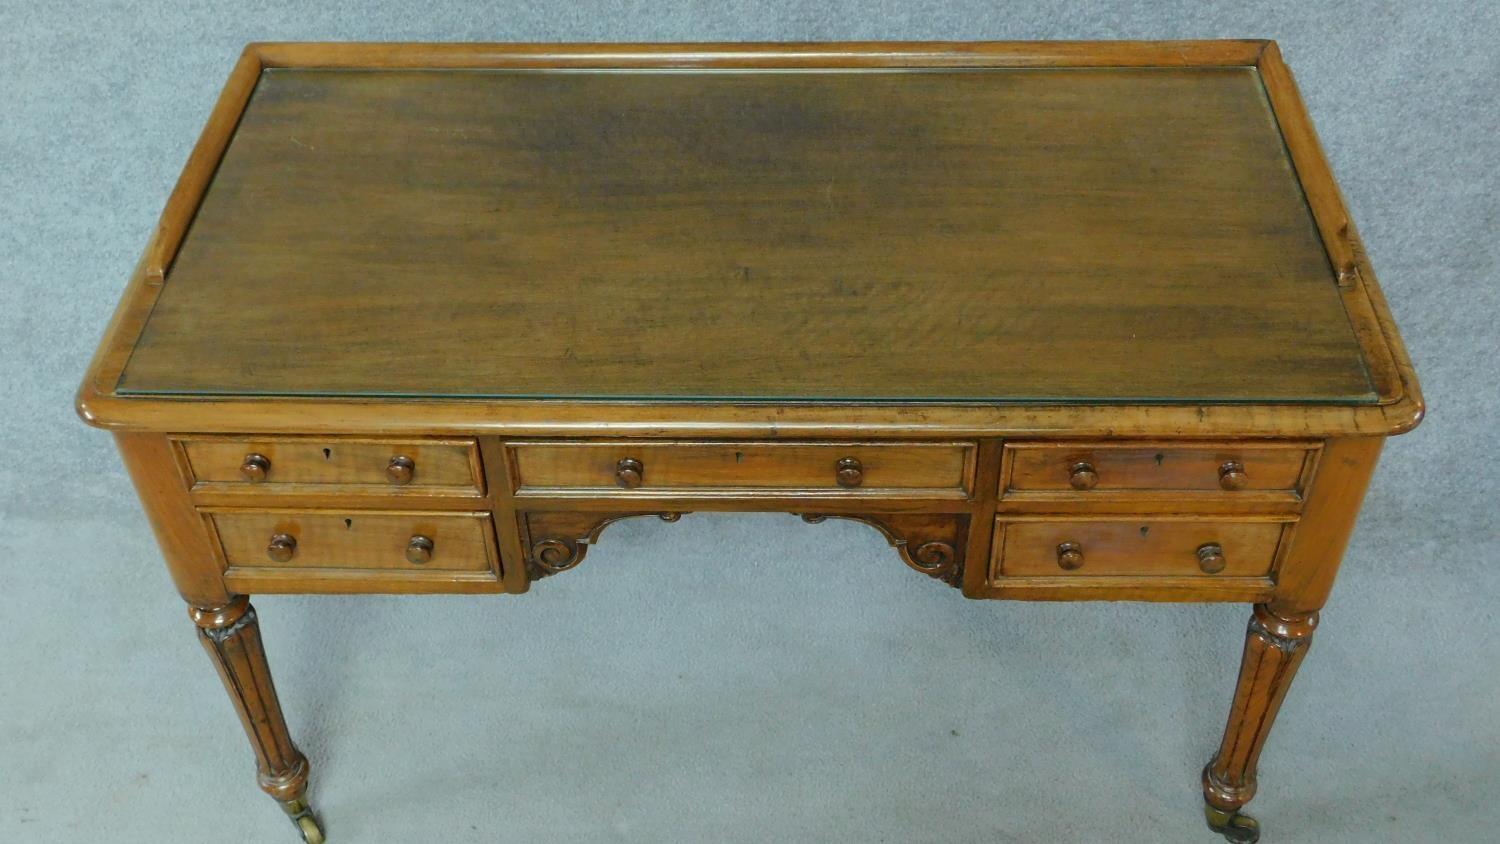 A William IV mahogany writing table with glass inset top and five frieze drawers, raised on tapering - Image 5 of 7